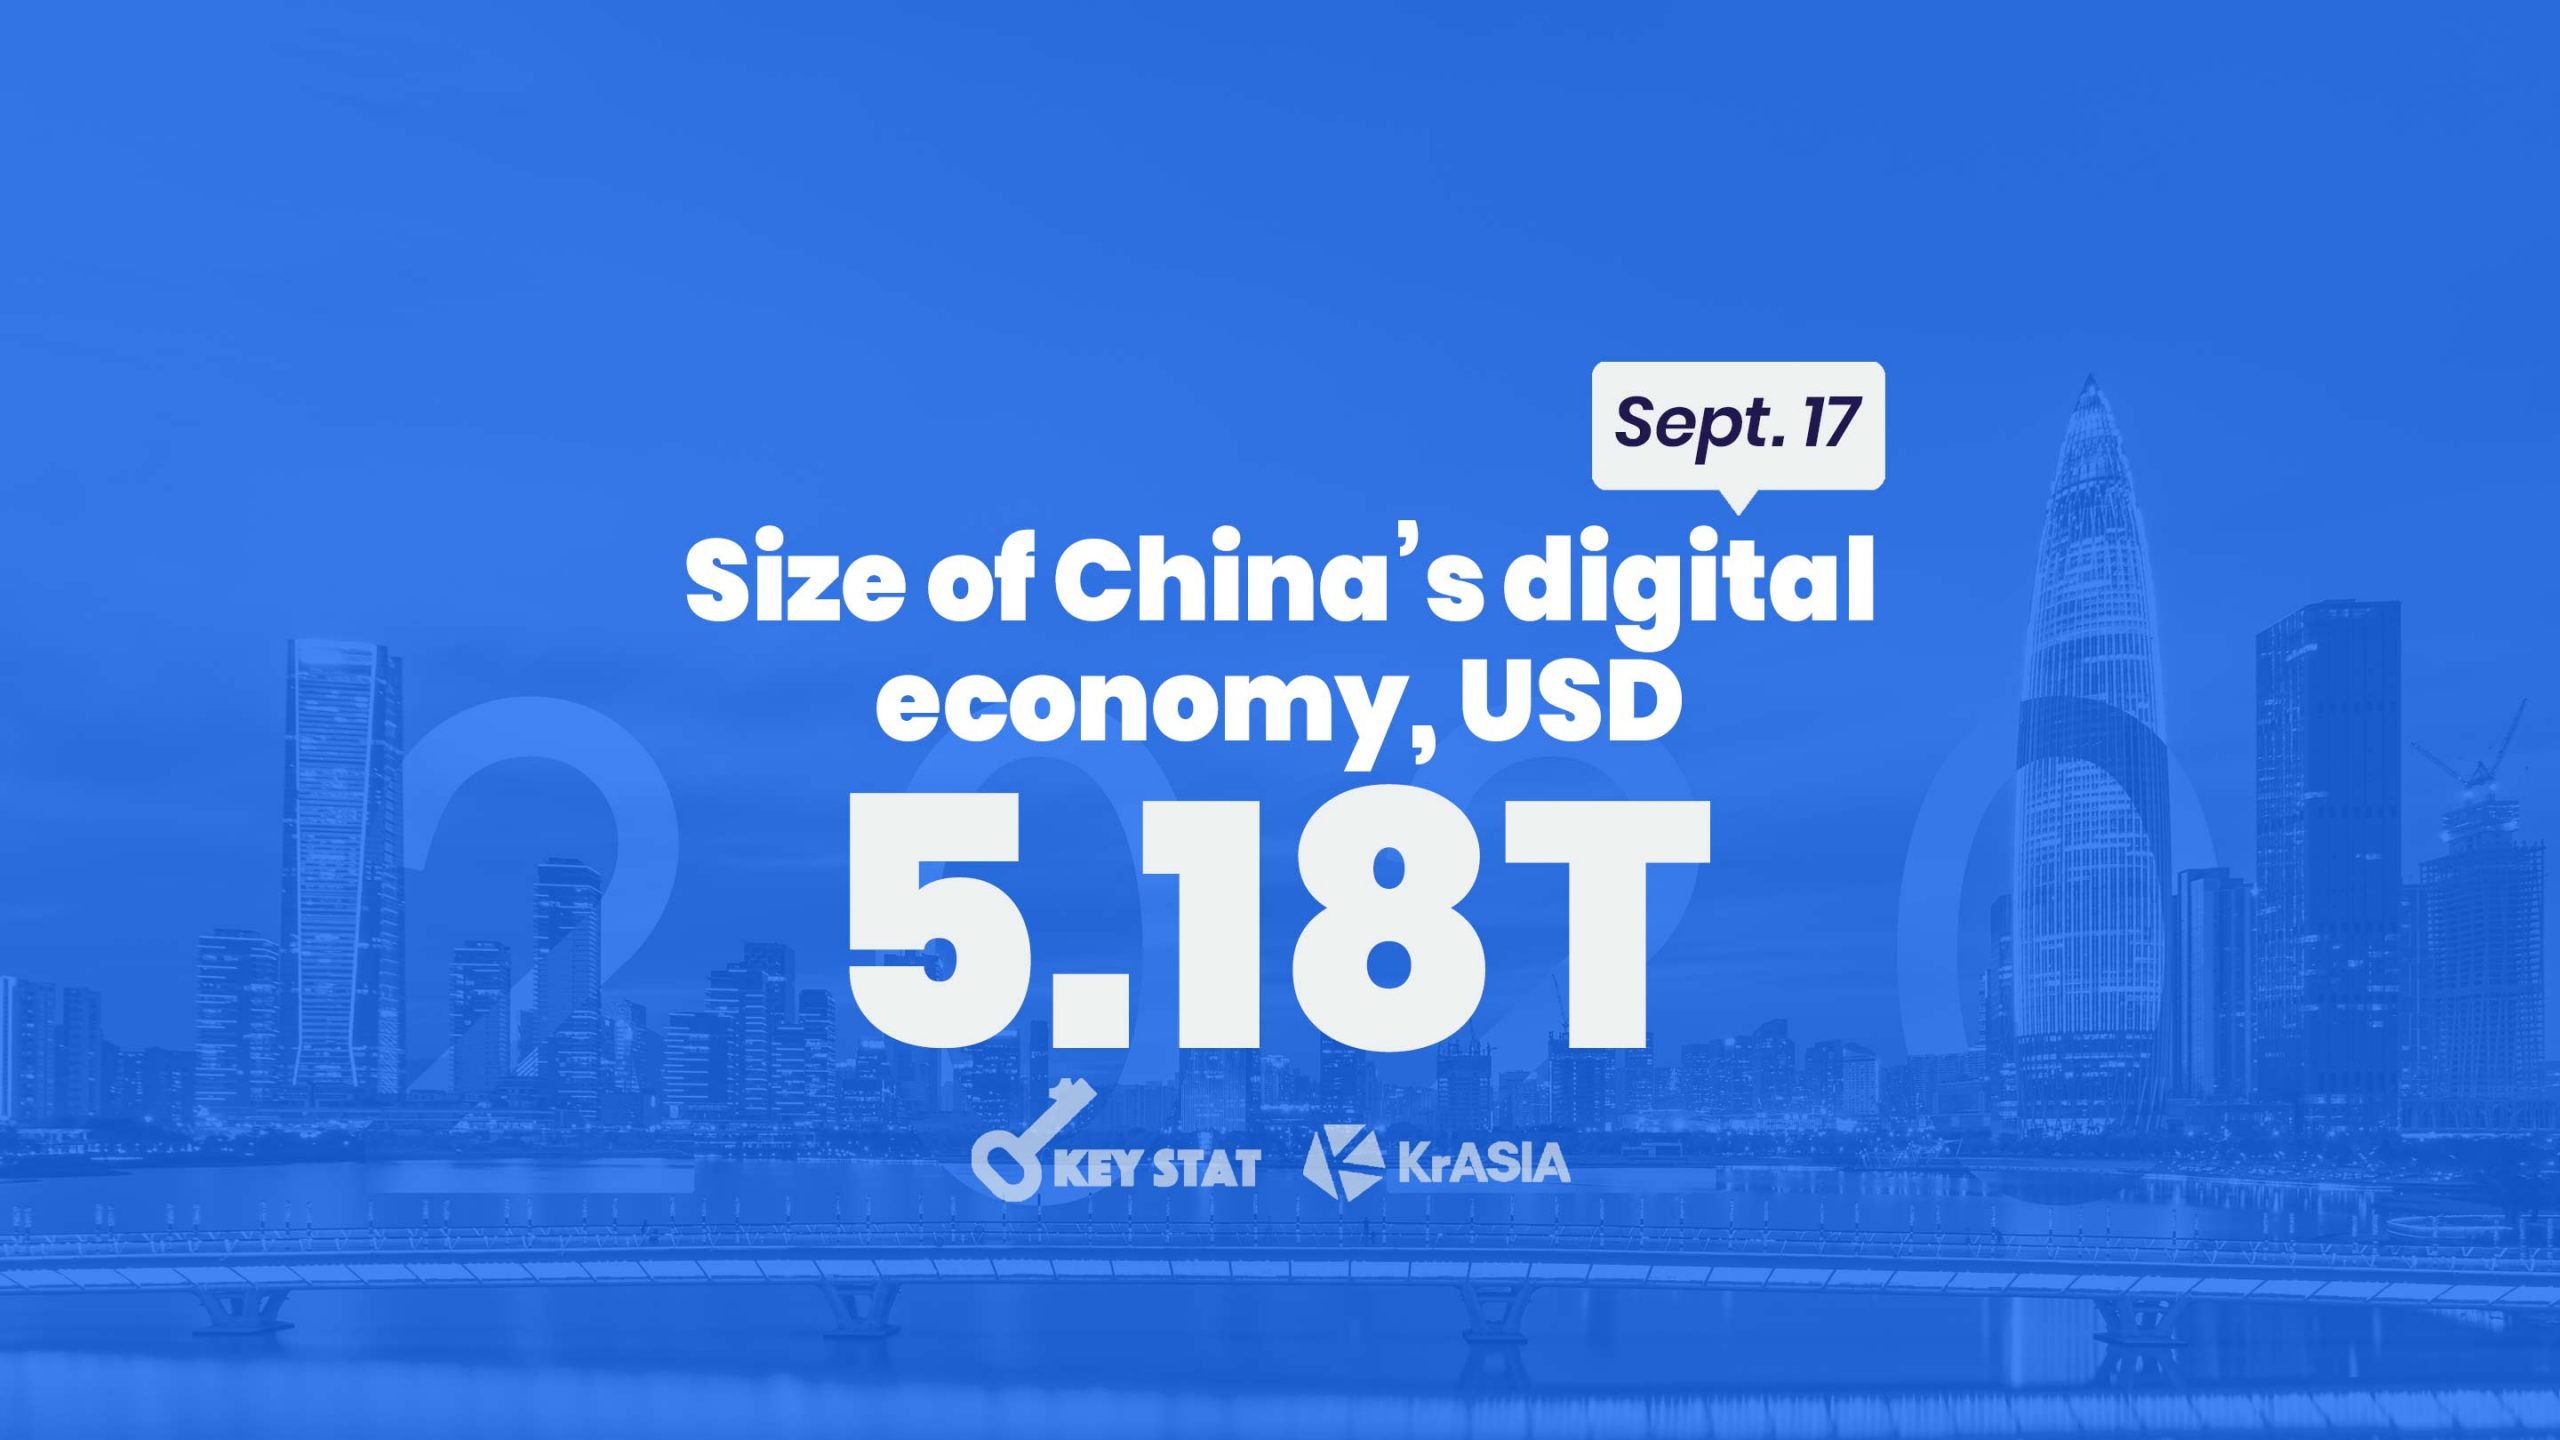 KEY STAT | Digital economy contributes more than a third of China’s GDP